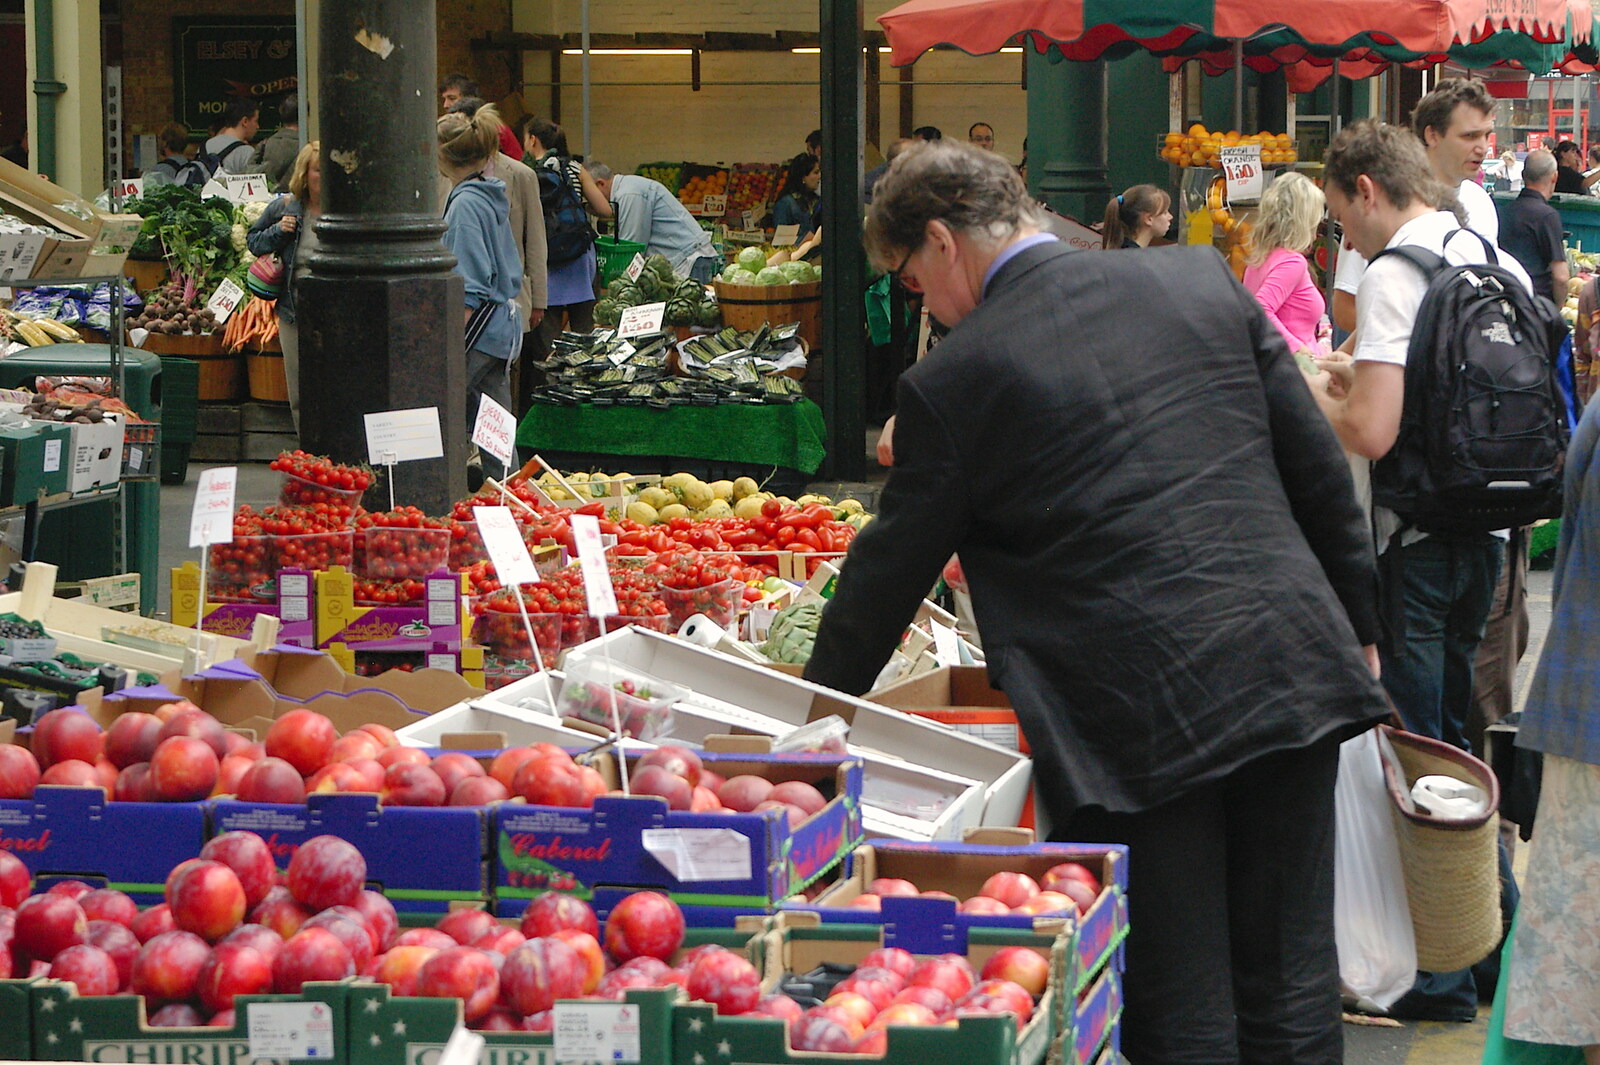 Jonathan Meades goes fruit shopping from Borough Market and North Clapham Tapas, London - 23rd July 2005